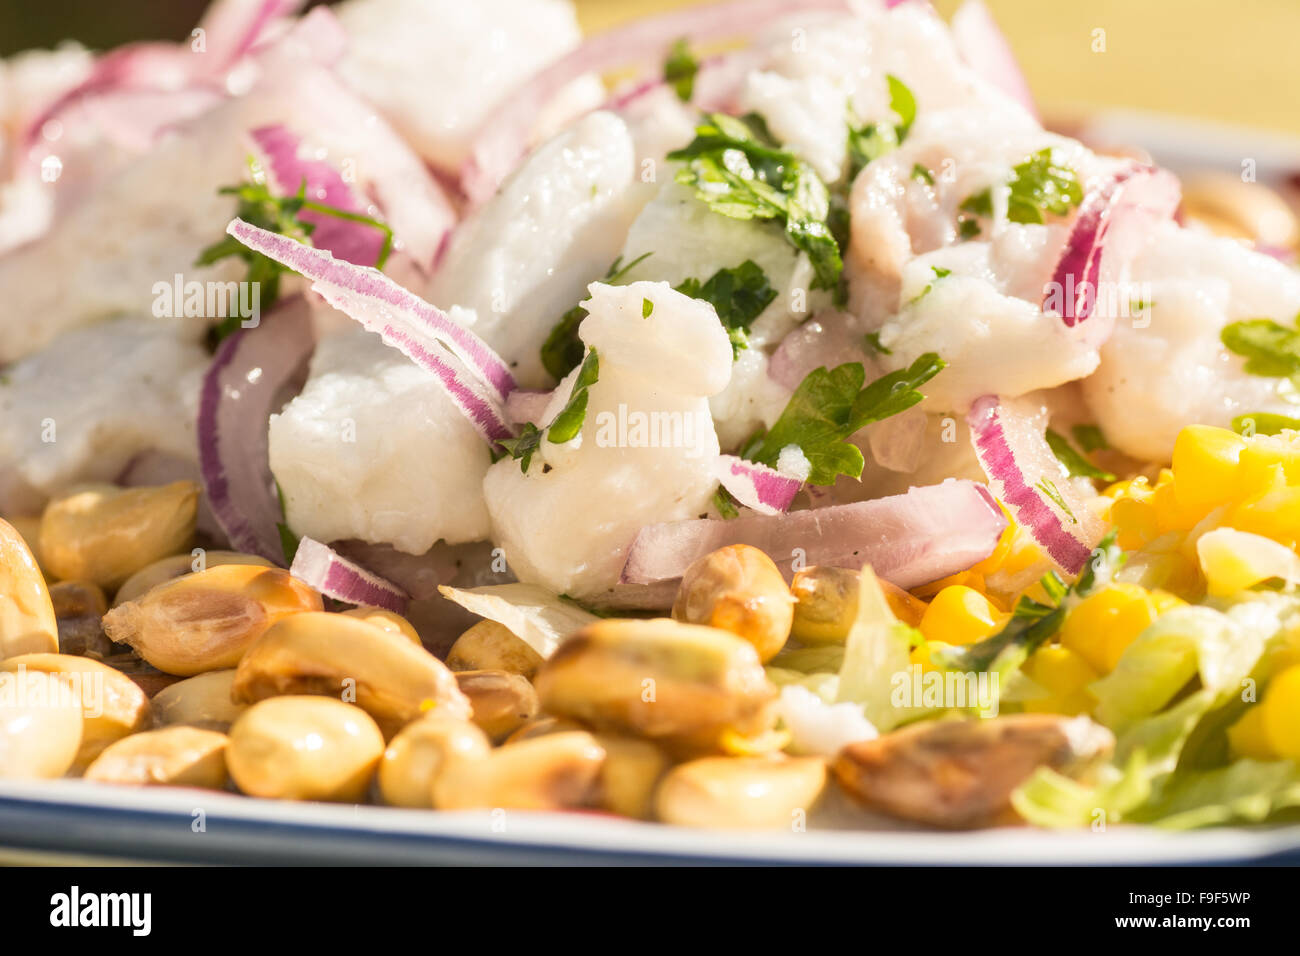 Typical Peruvian dish of Ceviche with Cancha (toasted maize) Stock Photo